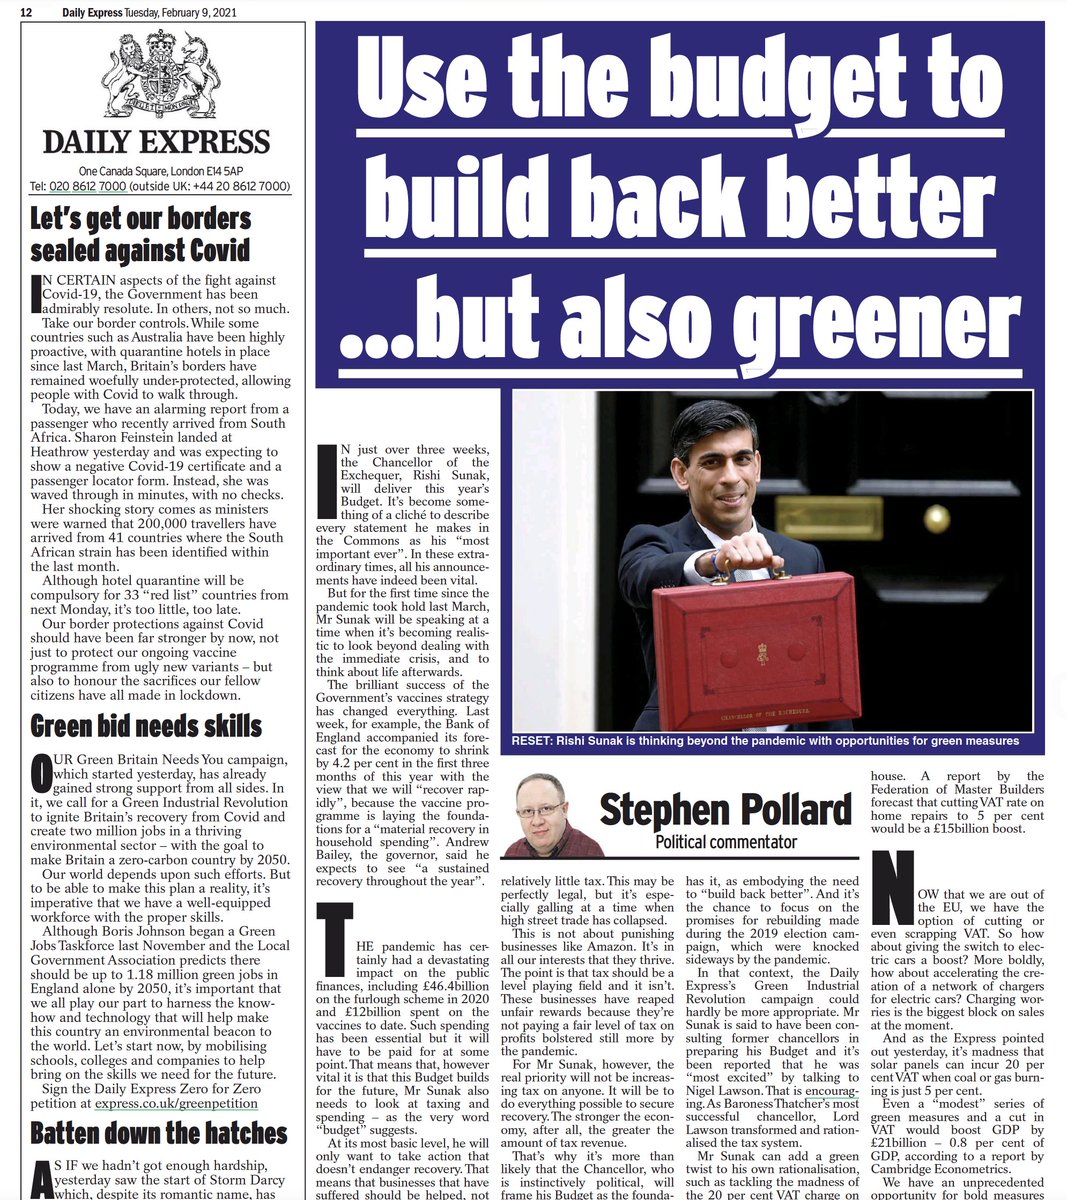 And Day Two also includes another op-ed page, with both an editorial and a columnist (Stephen Pollard, who not longer ago used to regularly rage against the "green obsession")